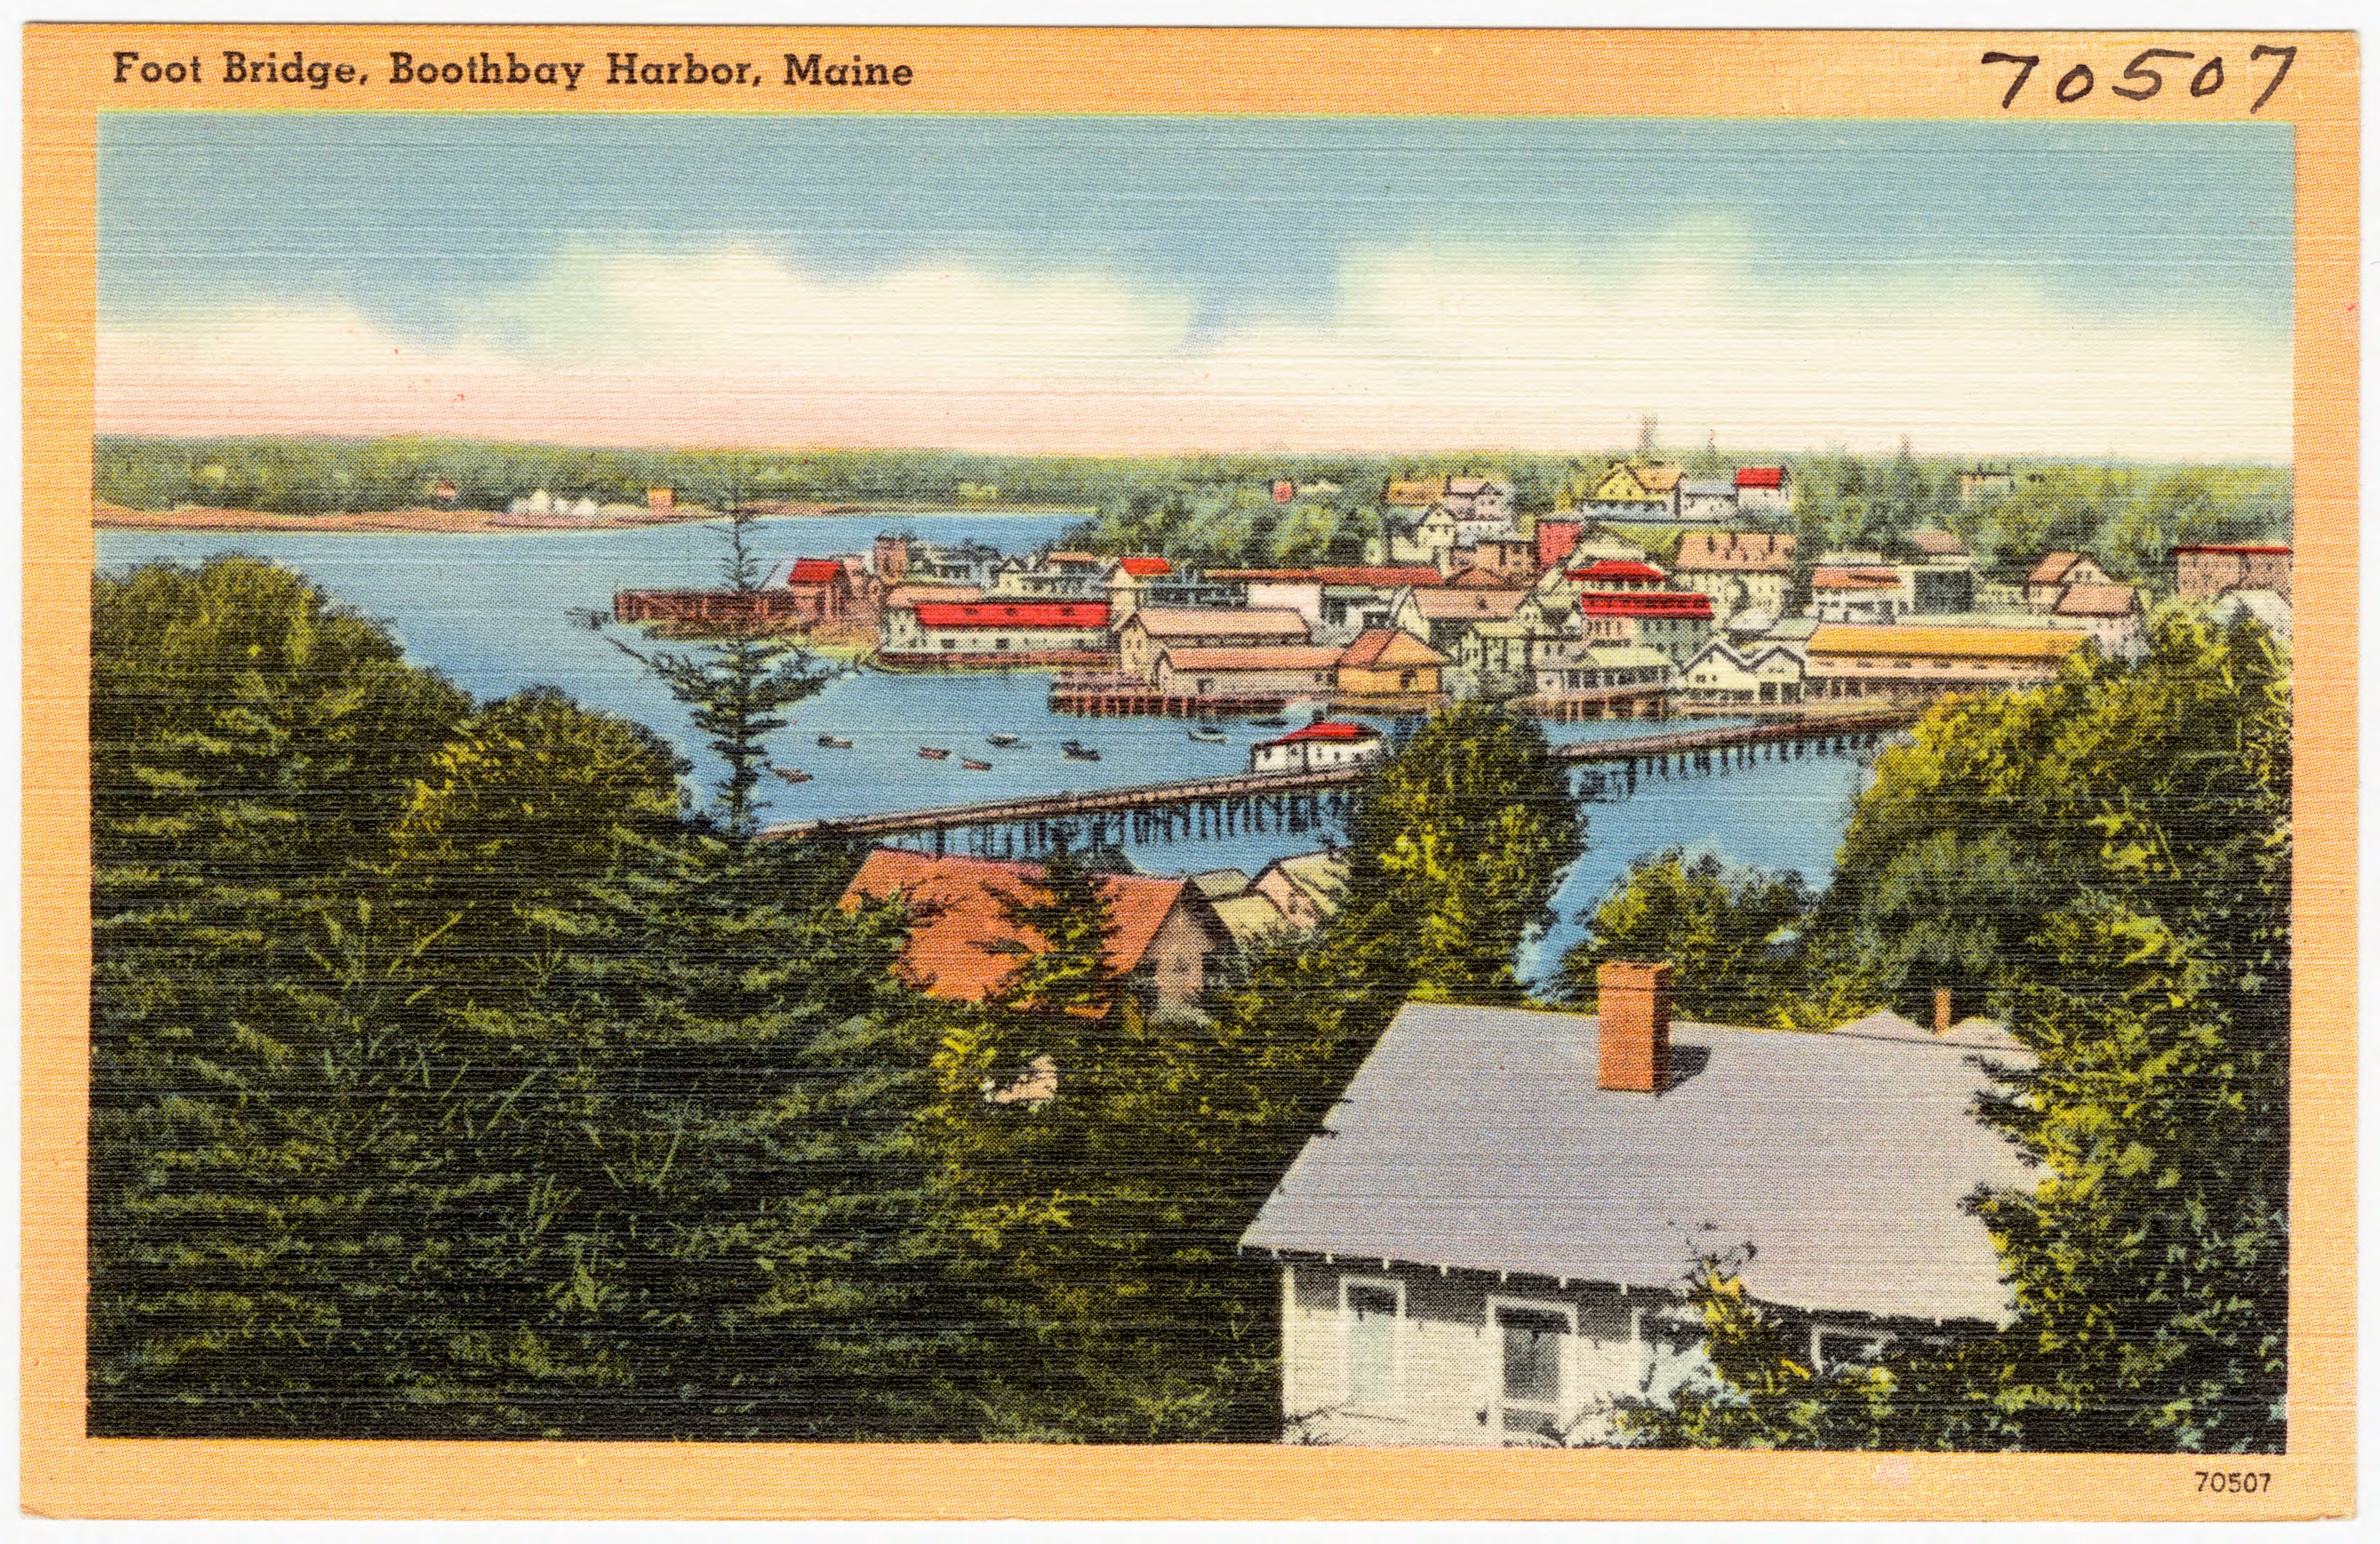 Boothbay Harbor Memorial Library - Wikipedia